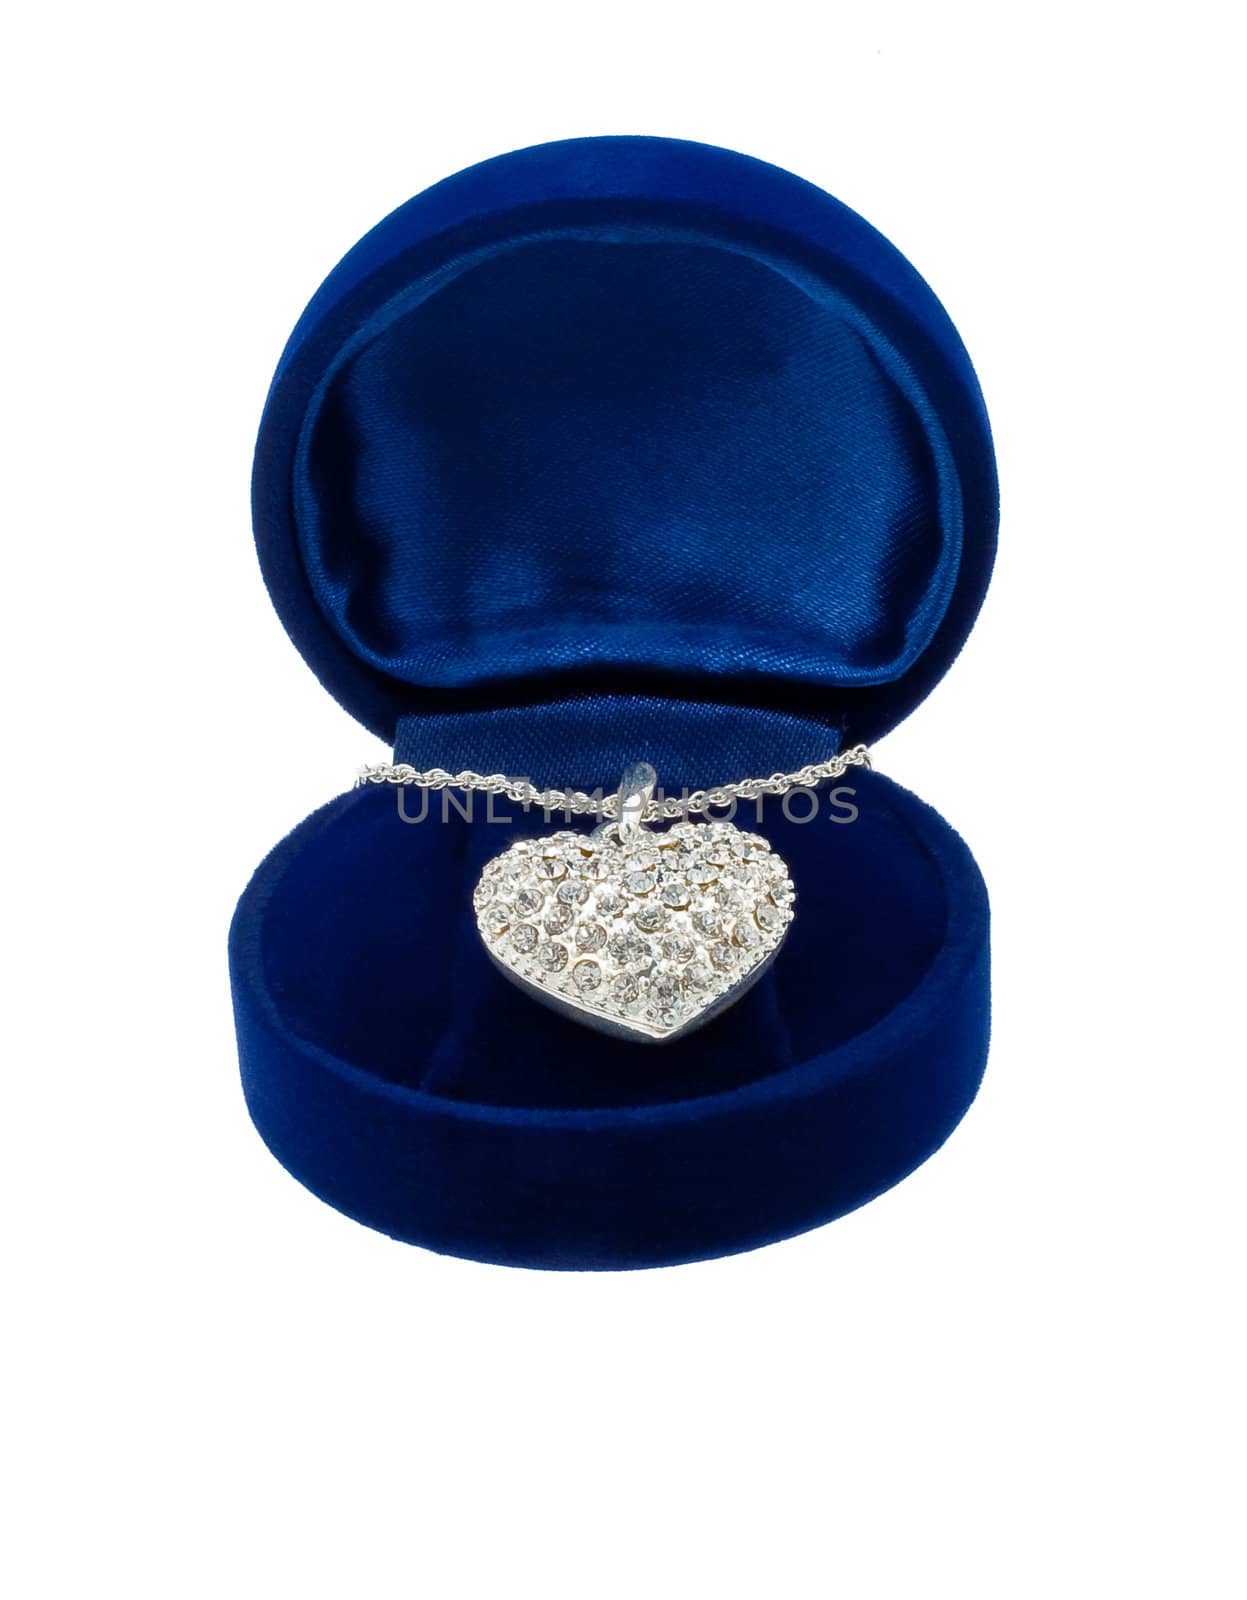 Chain with a brooch in form of heart in blue present box on white background